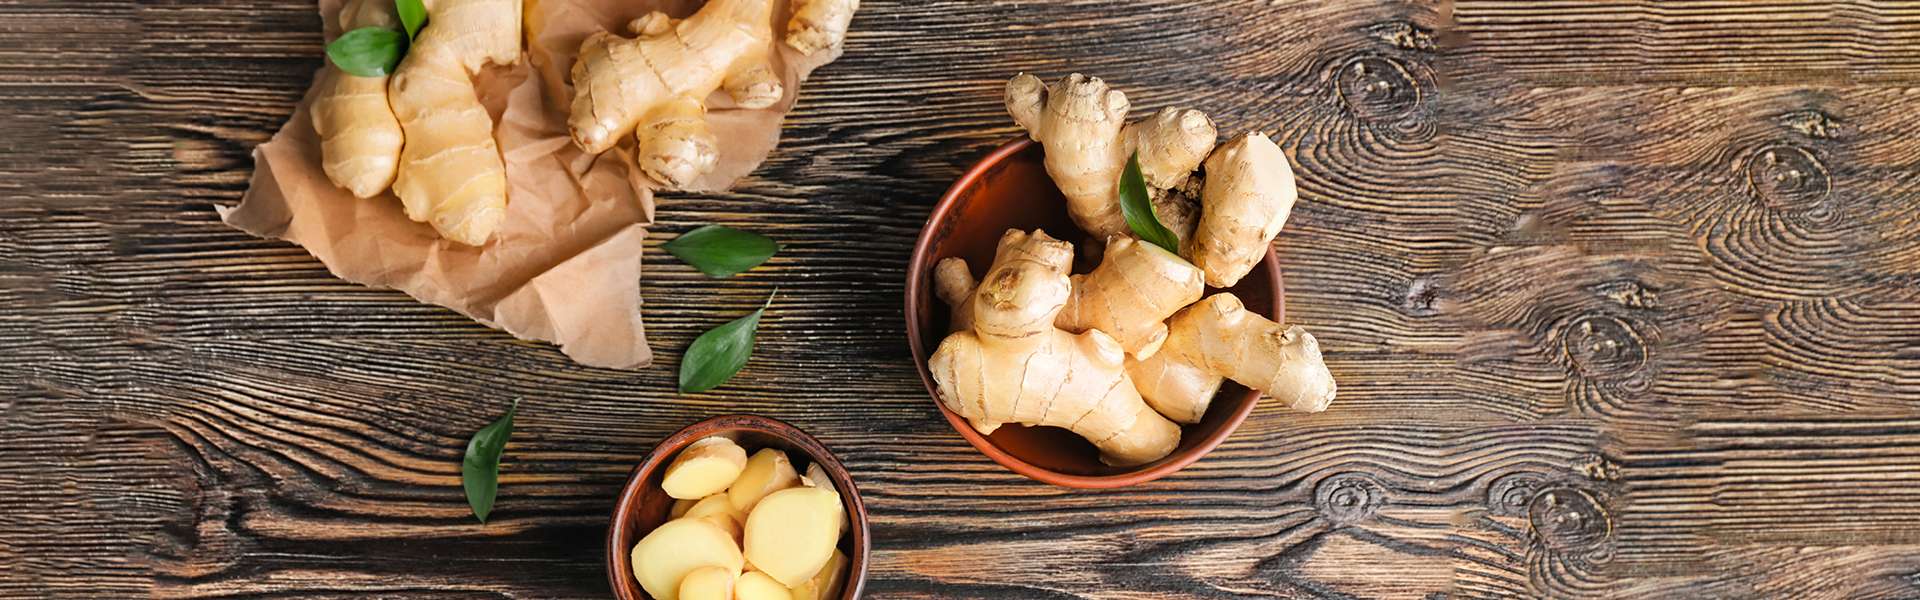 Ginger, the ally for your immune defenses